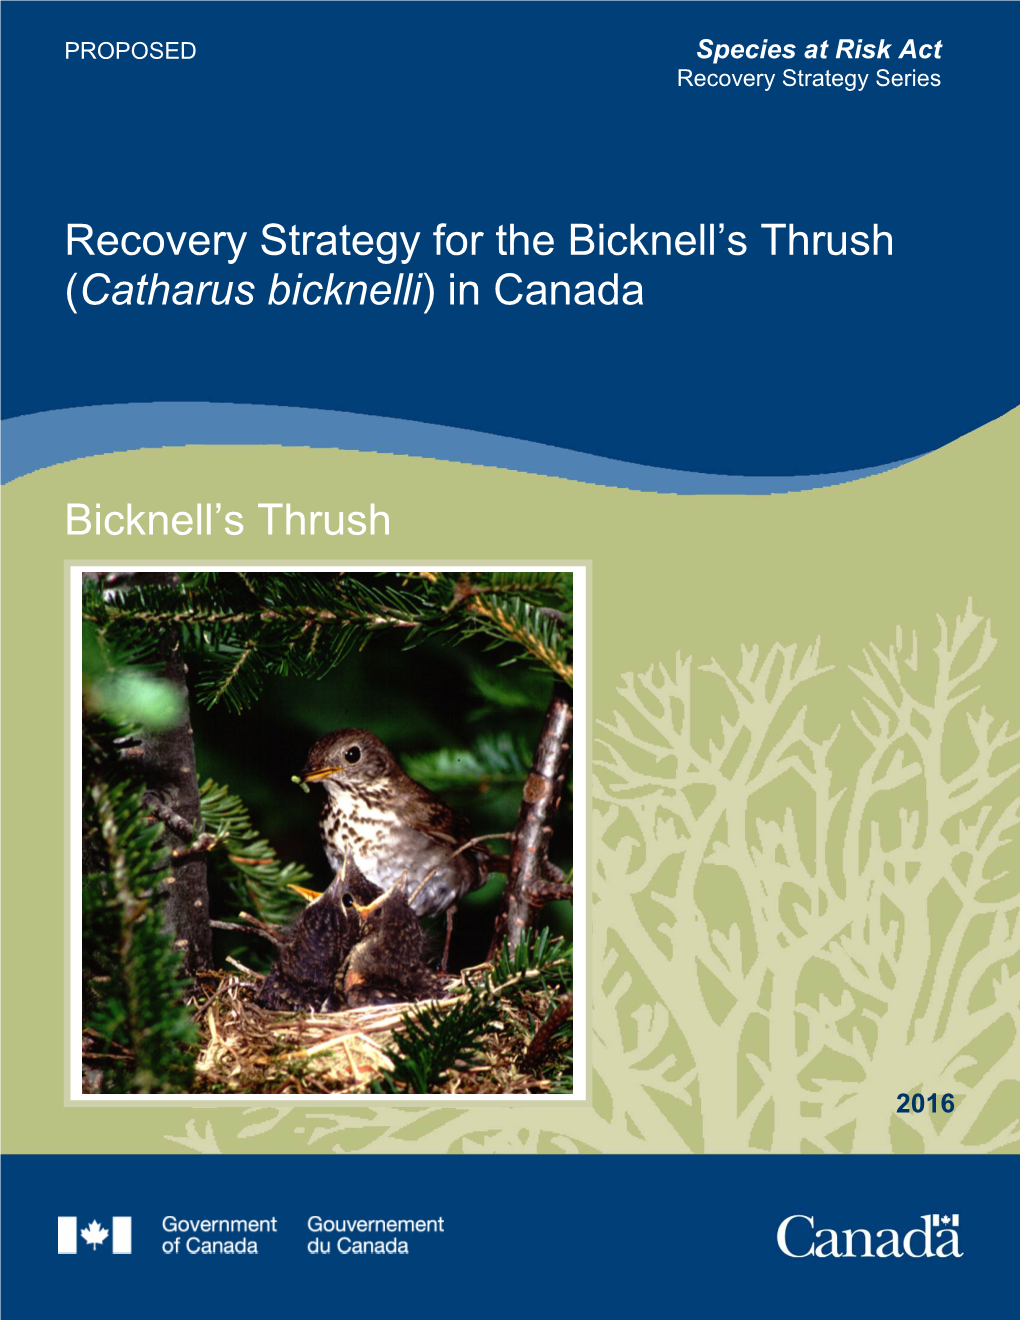 Bicknell's Thrush (Catharus Bicknelli) in Managed Forests: Nest-Site Selection, Diet, and Co-Occurrence with Swainson's Thrush (C